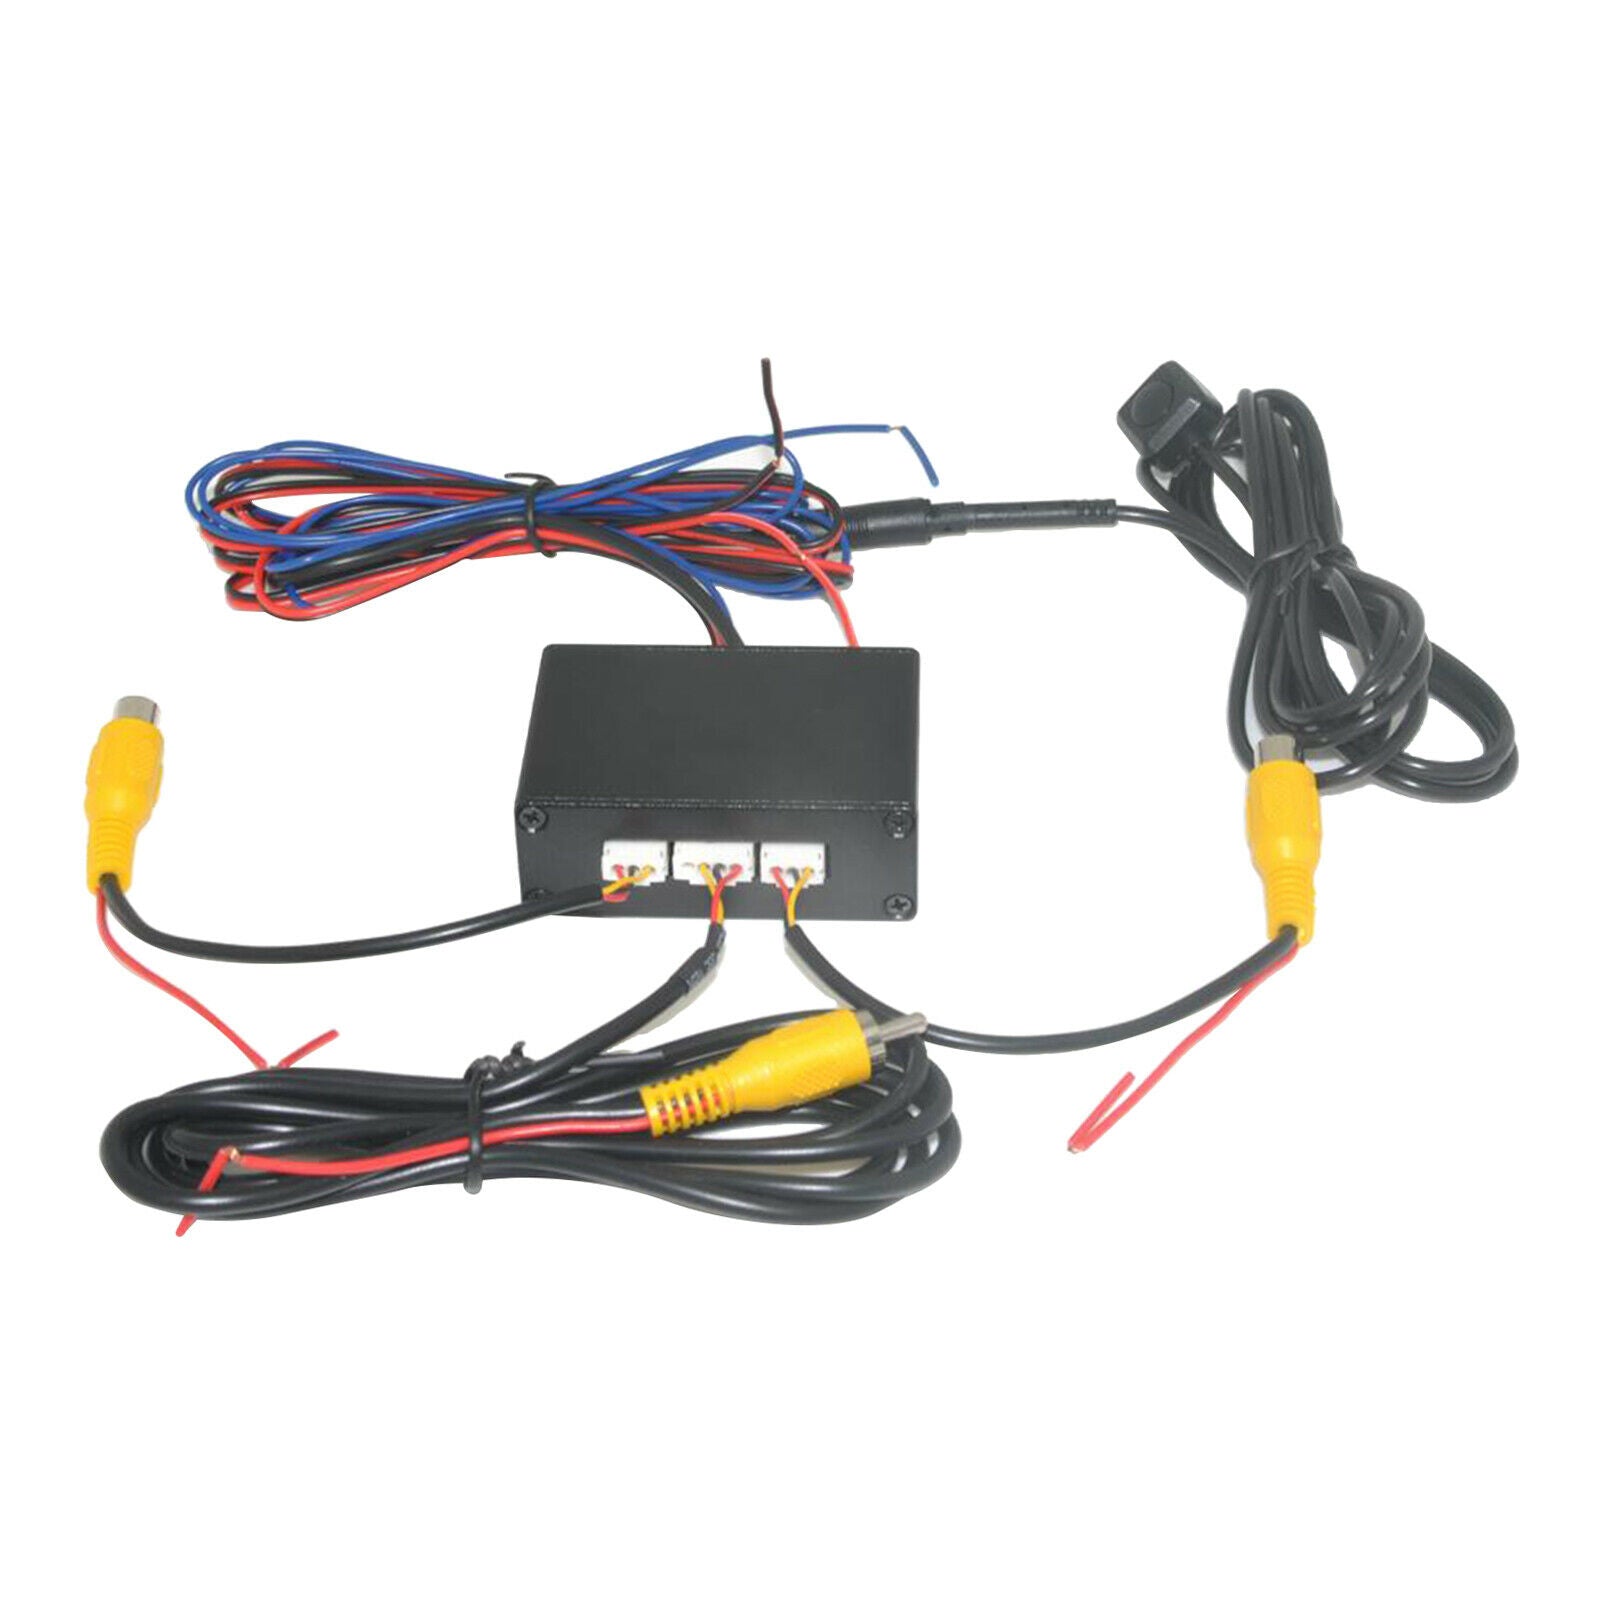 2 Way Car Cameras Switch Control Box fit for Front/Rear View Parking Camera